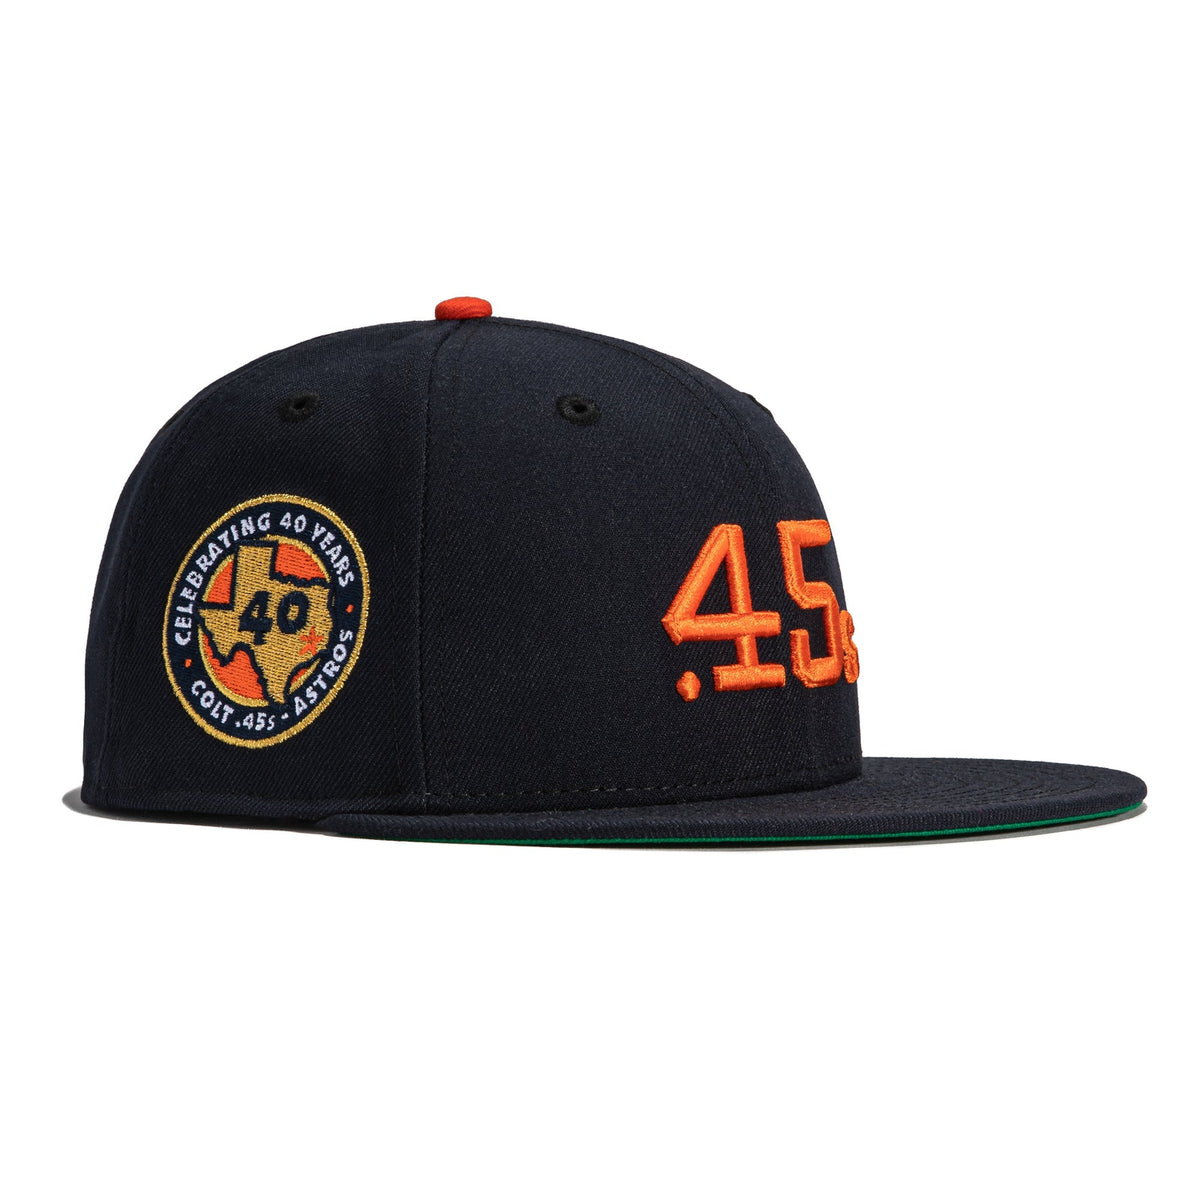 Hat Club Colt 45 Beer Pack Houston Astros 40th Anniversary Patch